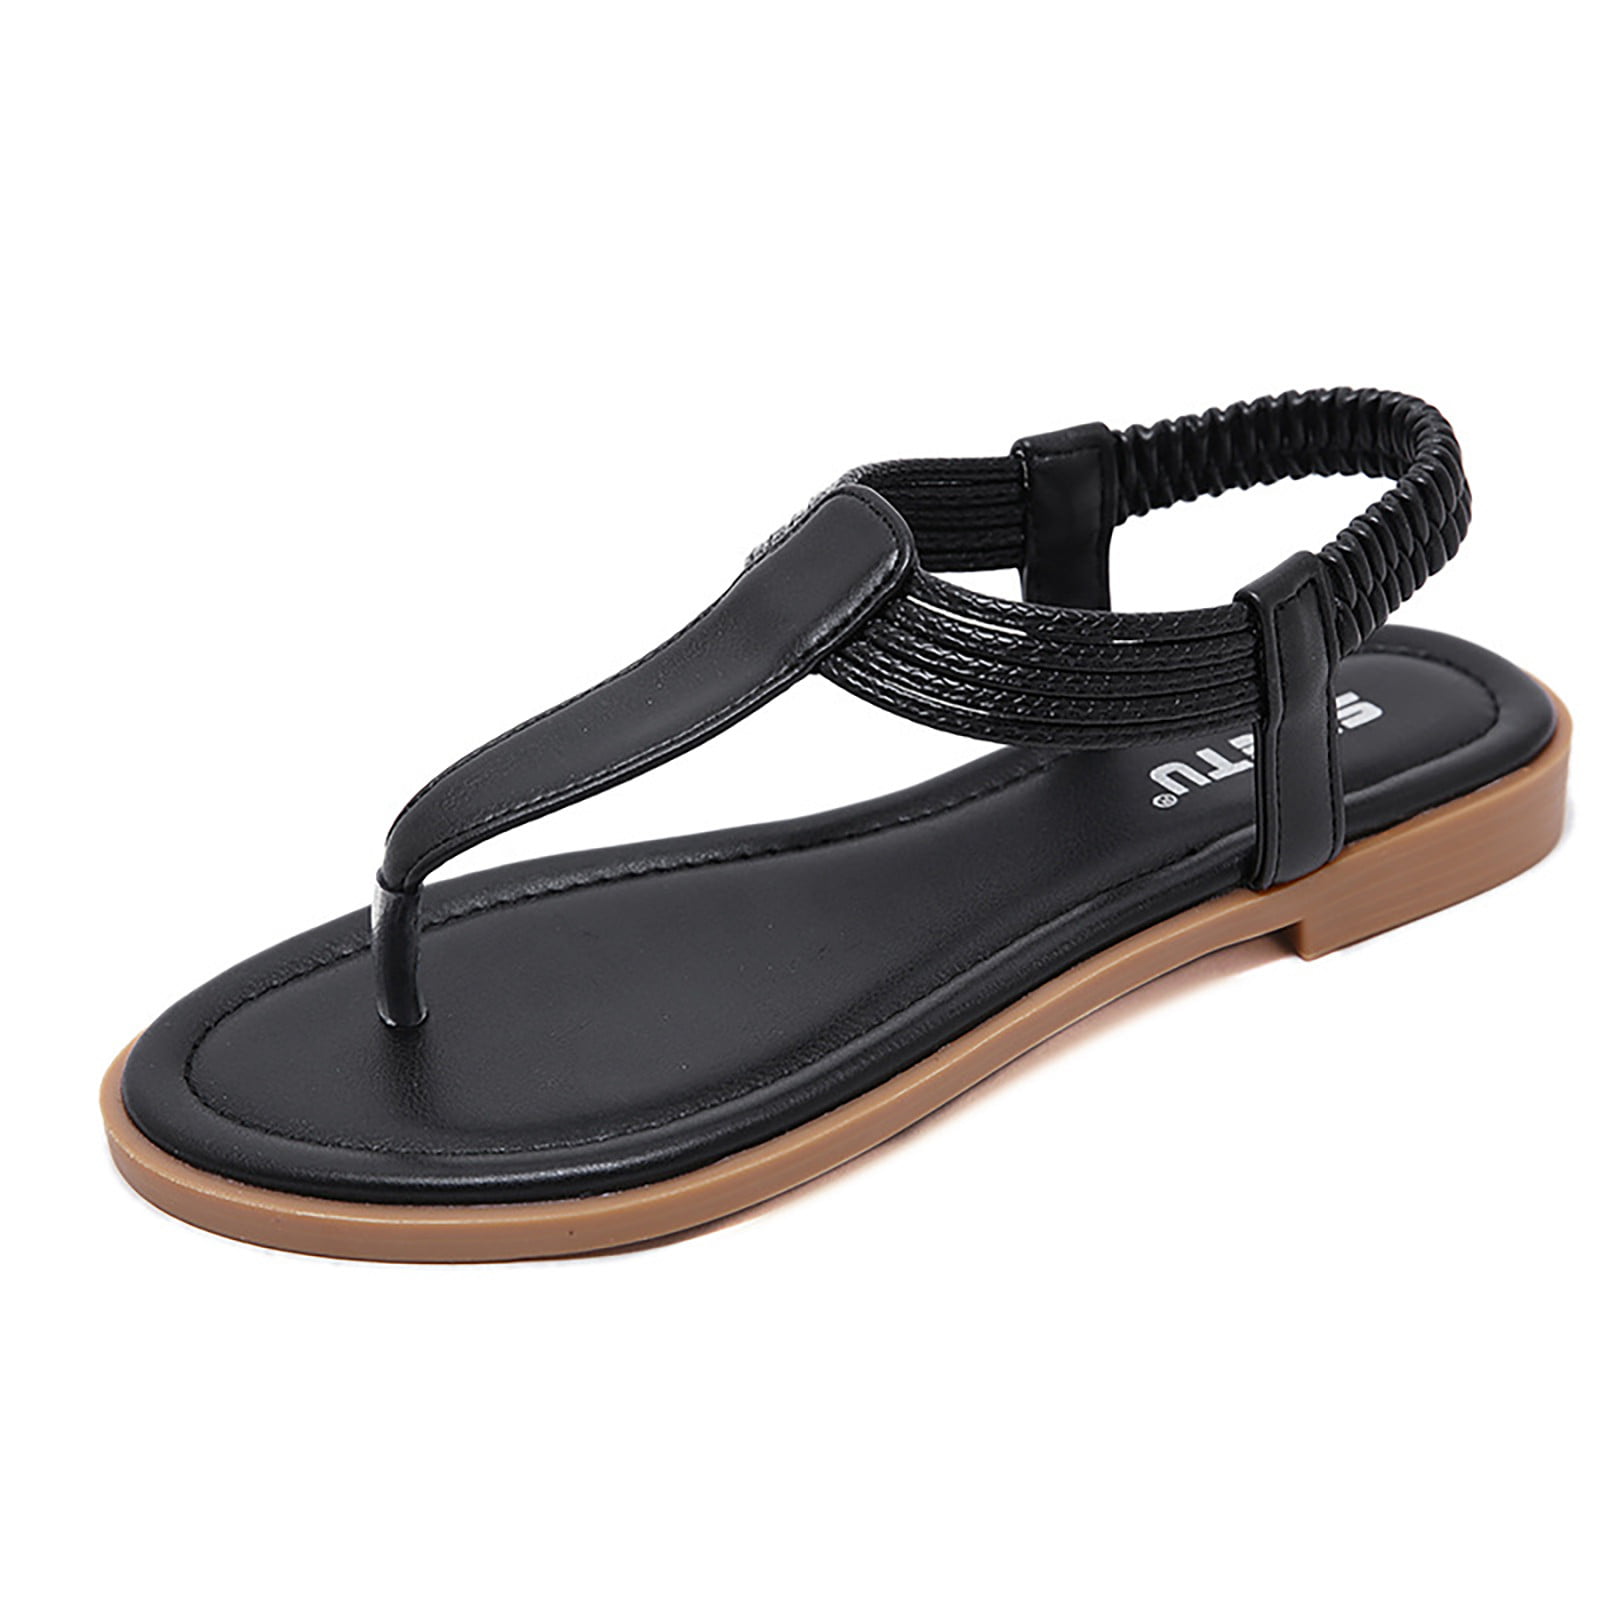 Stylish Casual One Toe Black and Grey Flat Sandal Slippers for